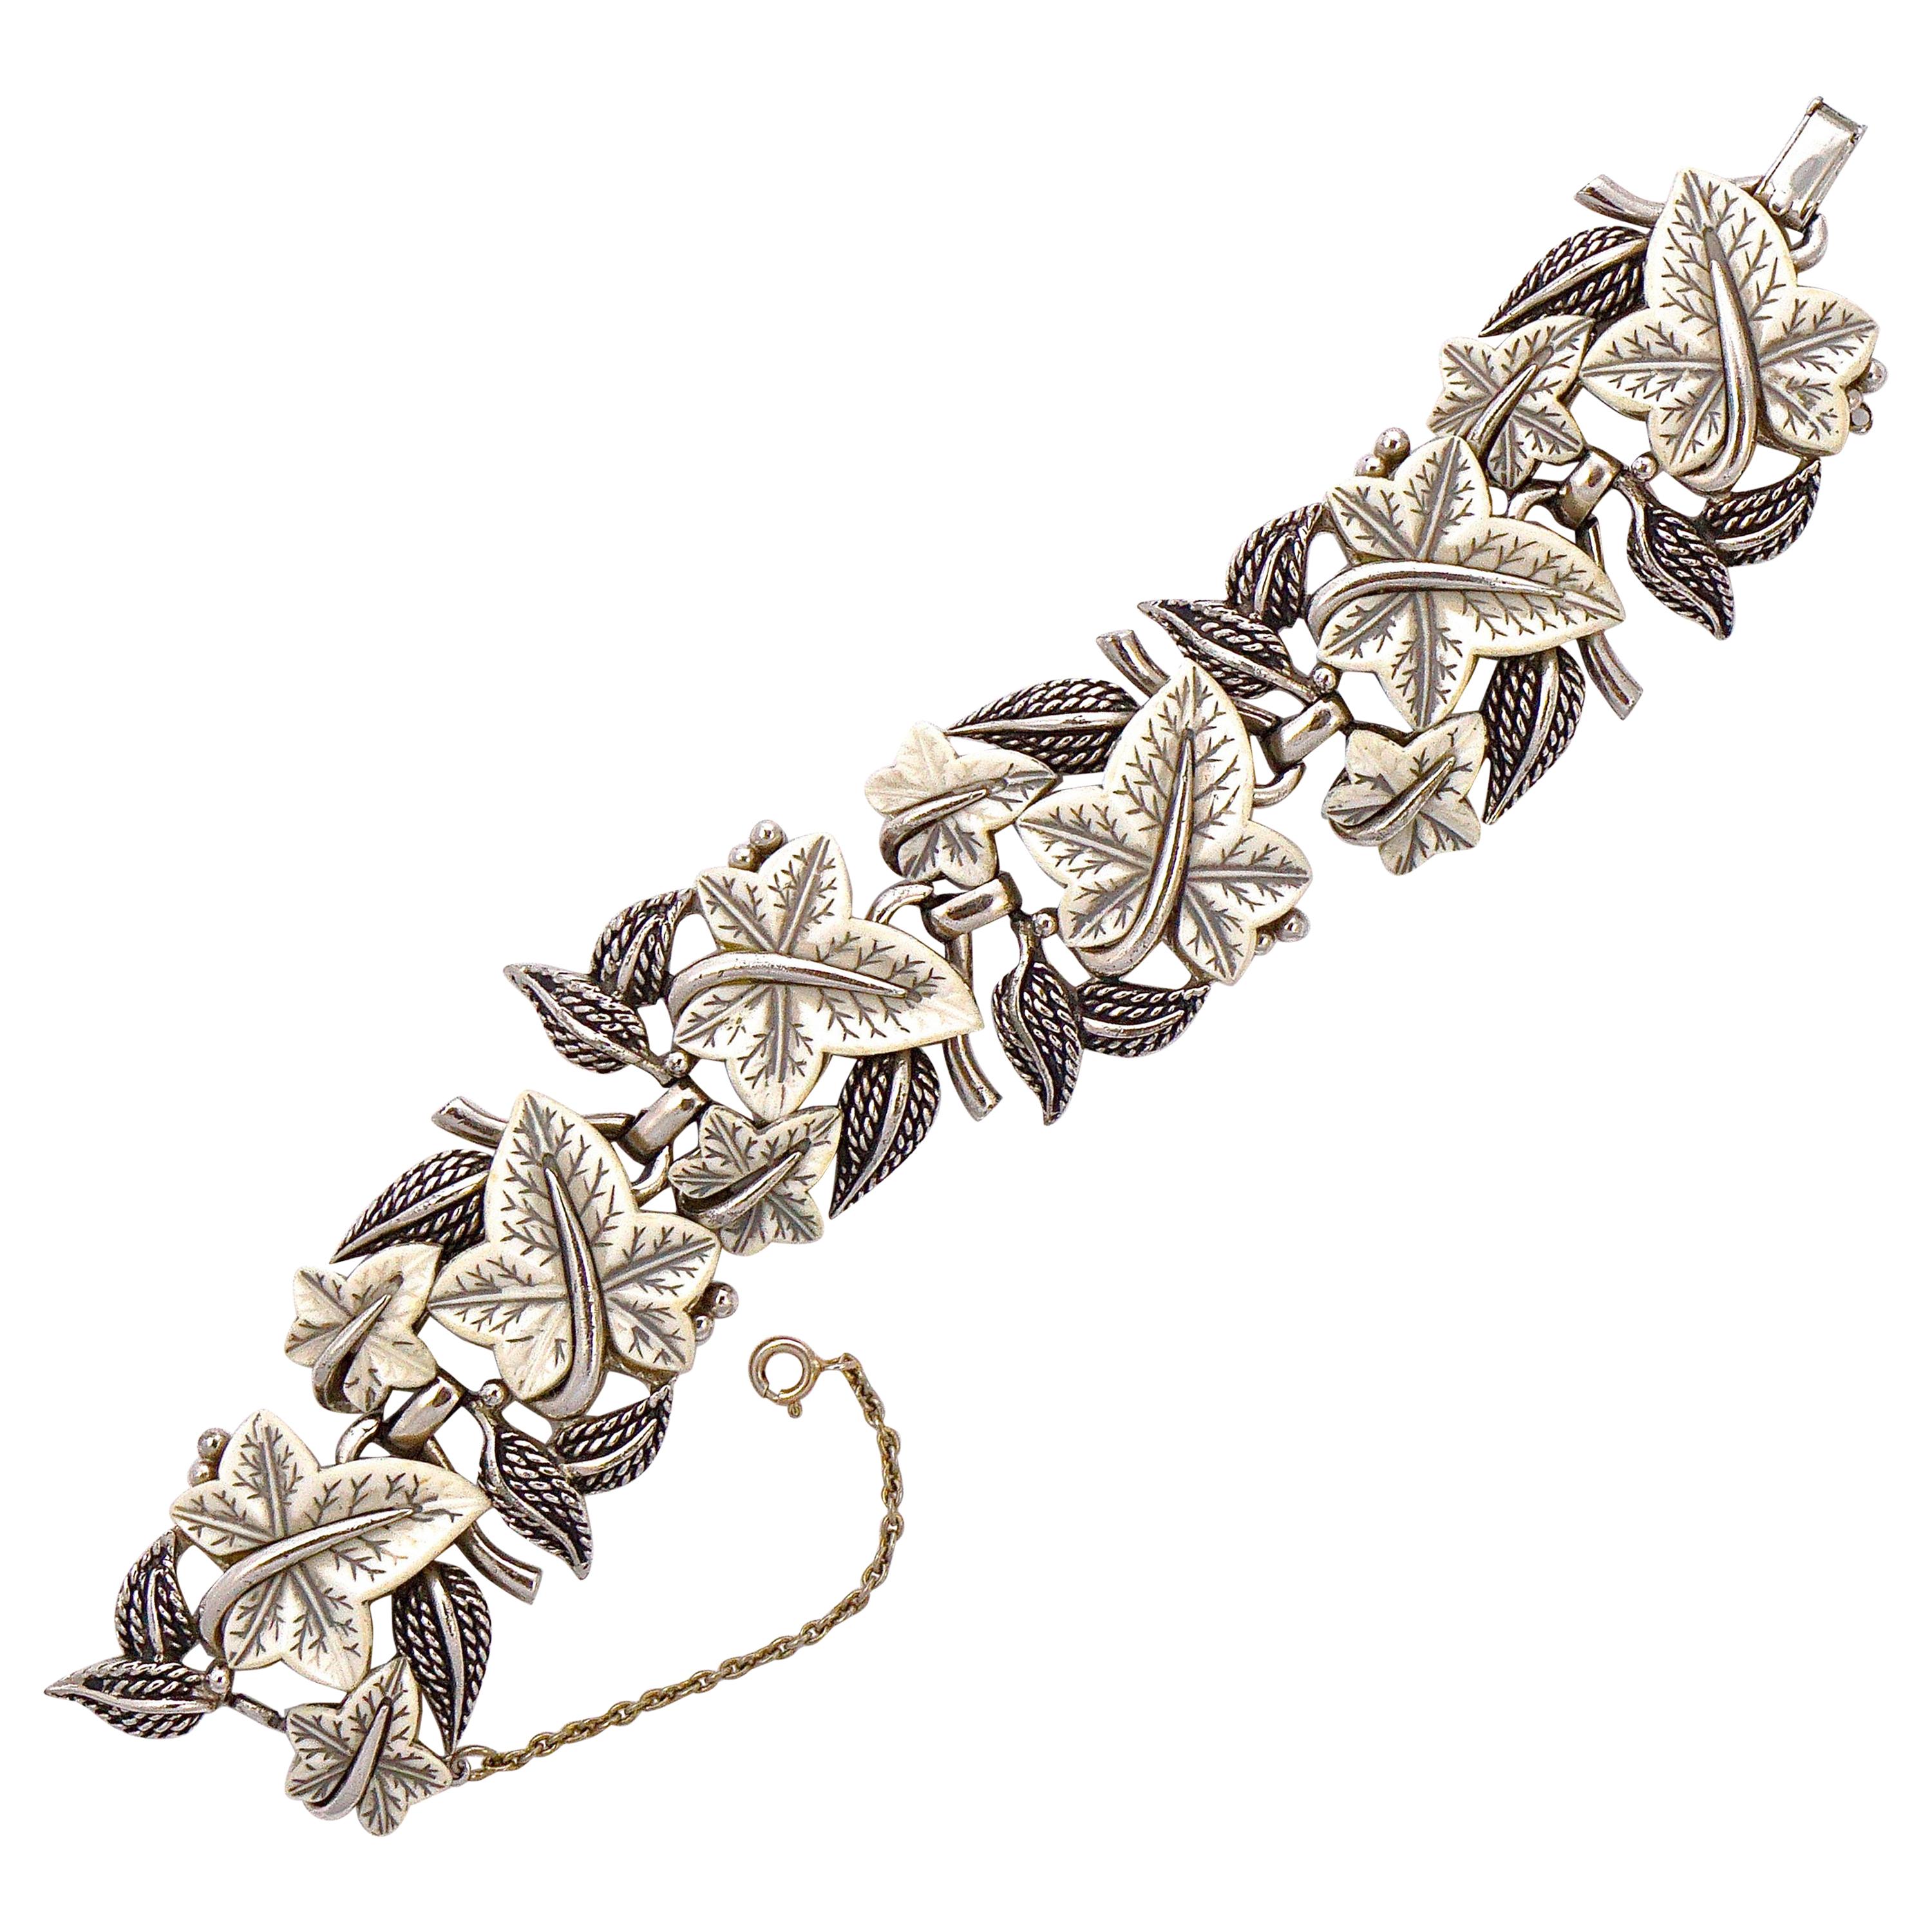 Boucher Silver Plated and White Glass Ivy Leaves Link Bracelet circa 1950s